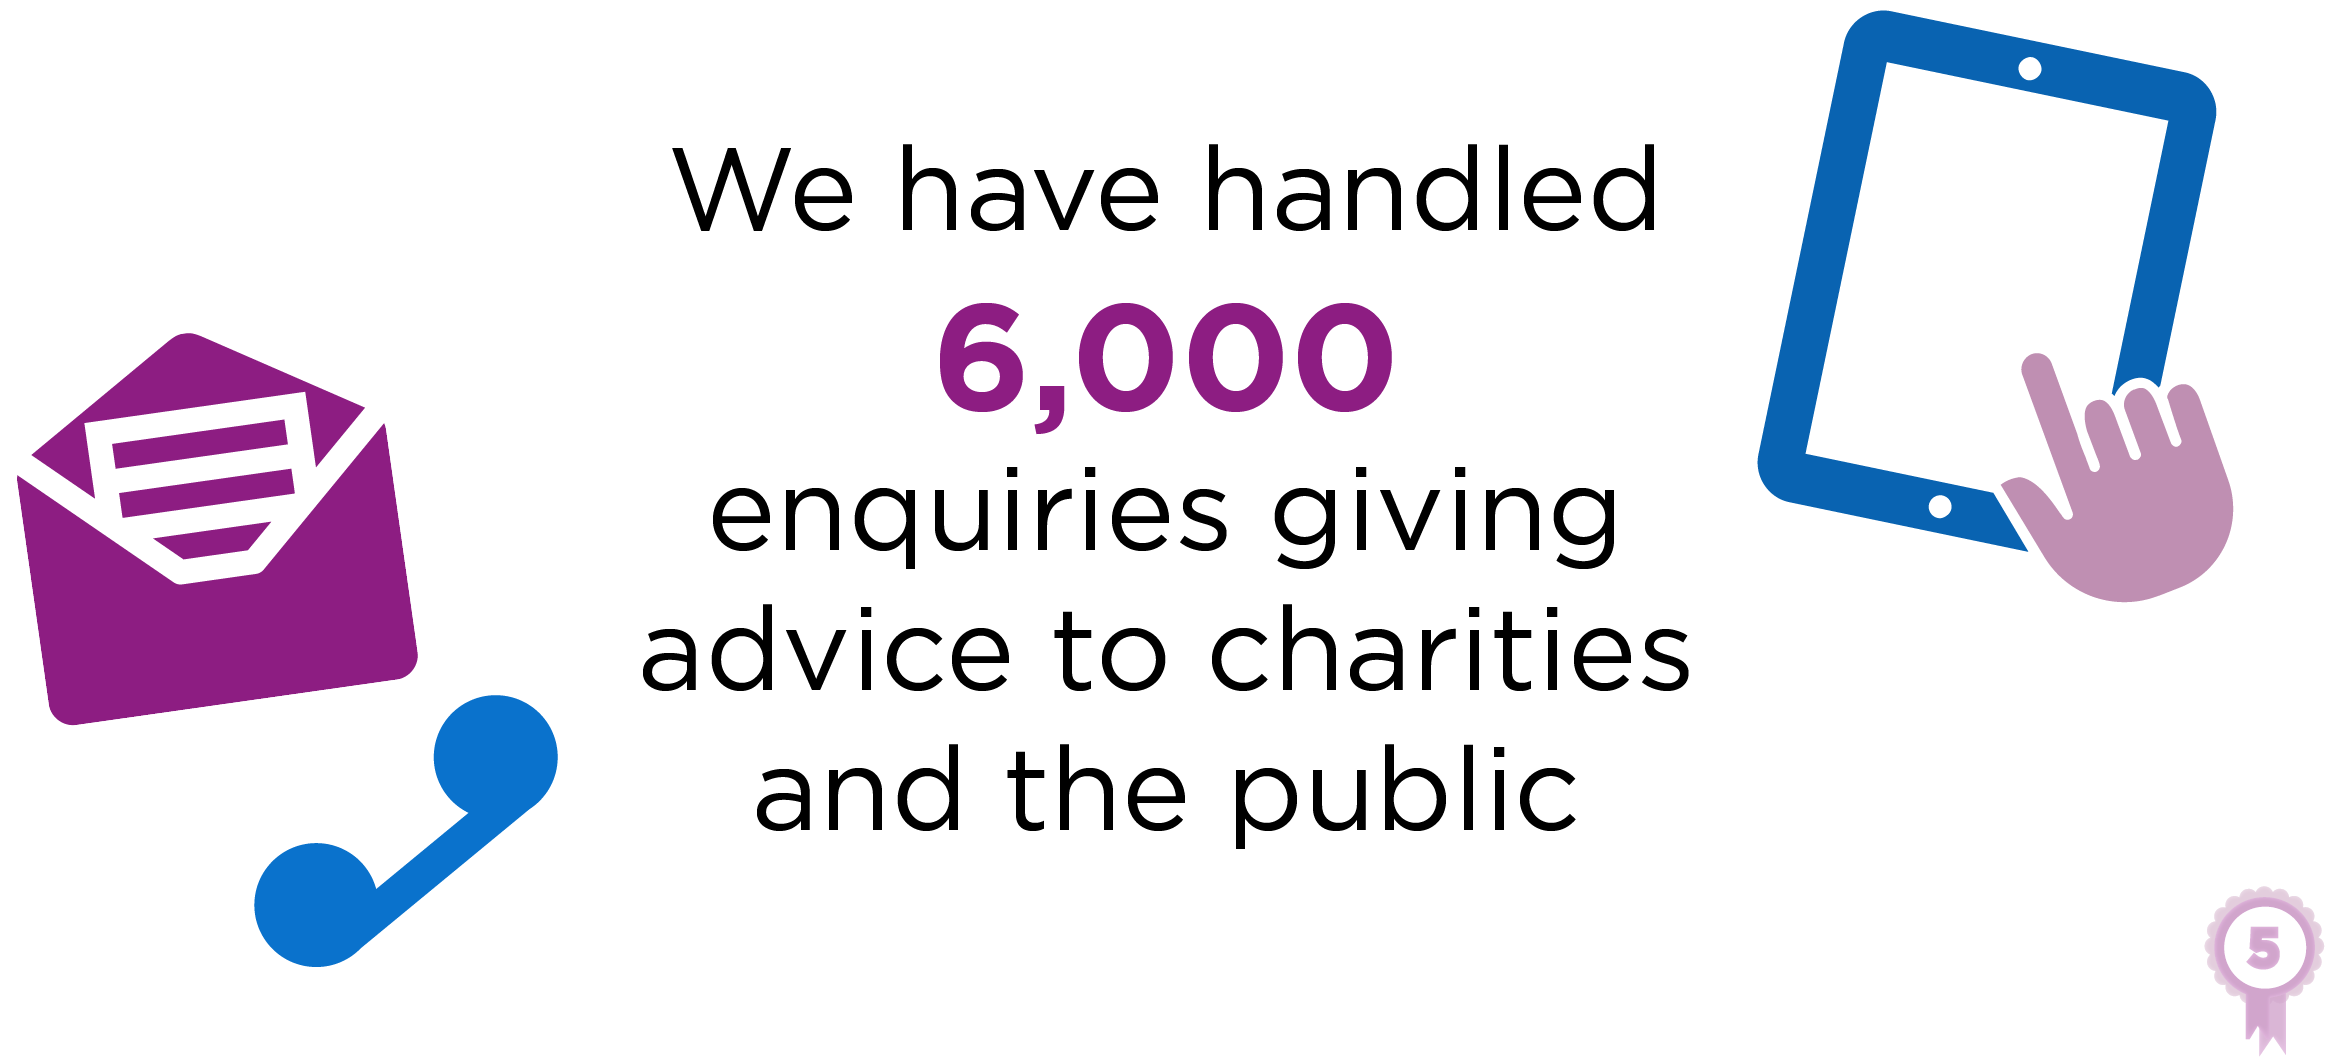 We have handled 6,000 enquiries giving advice to charities and the public